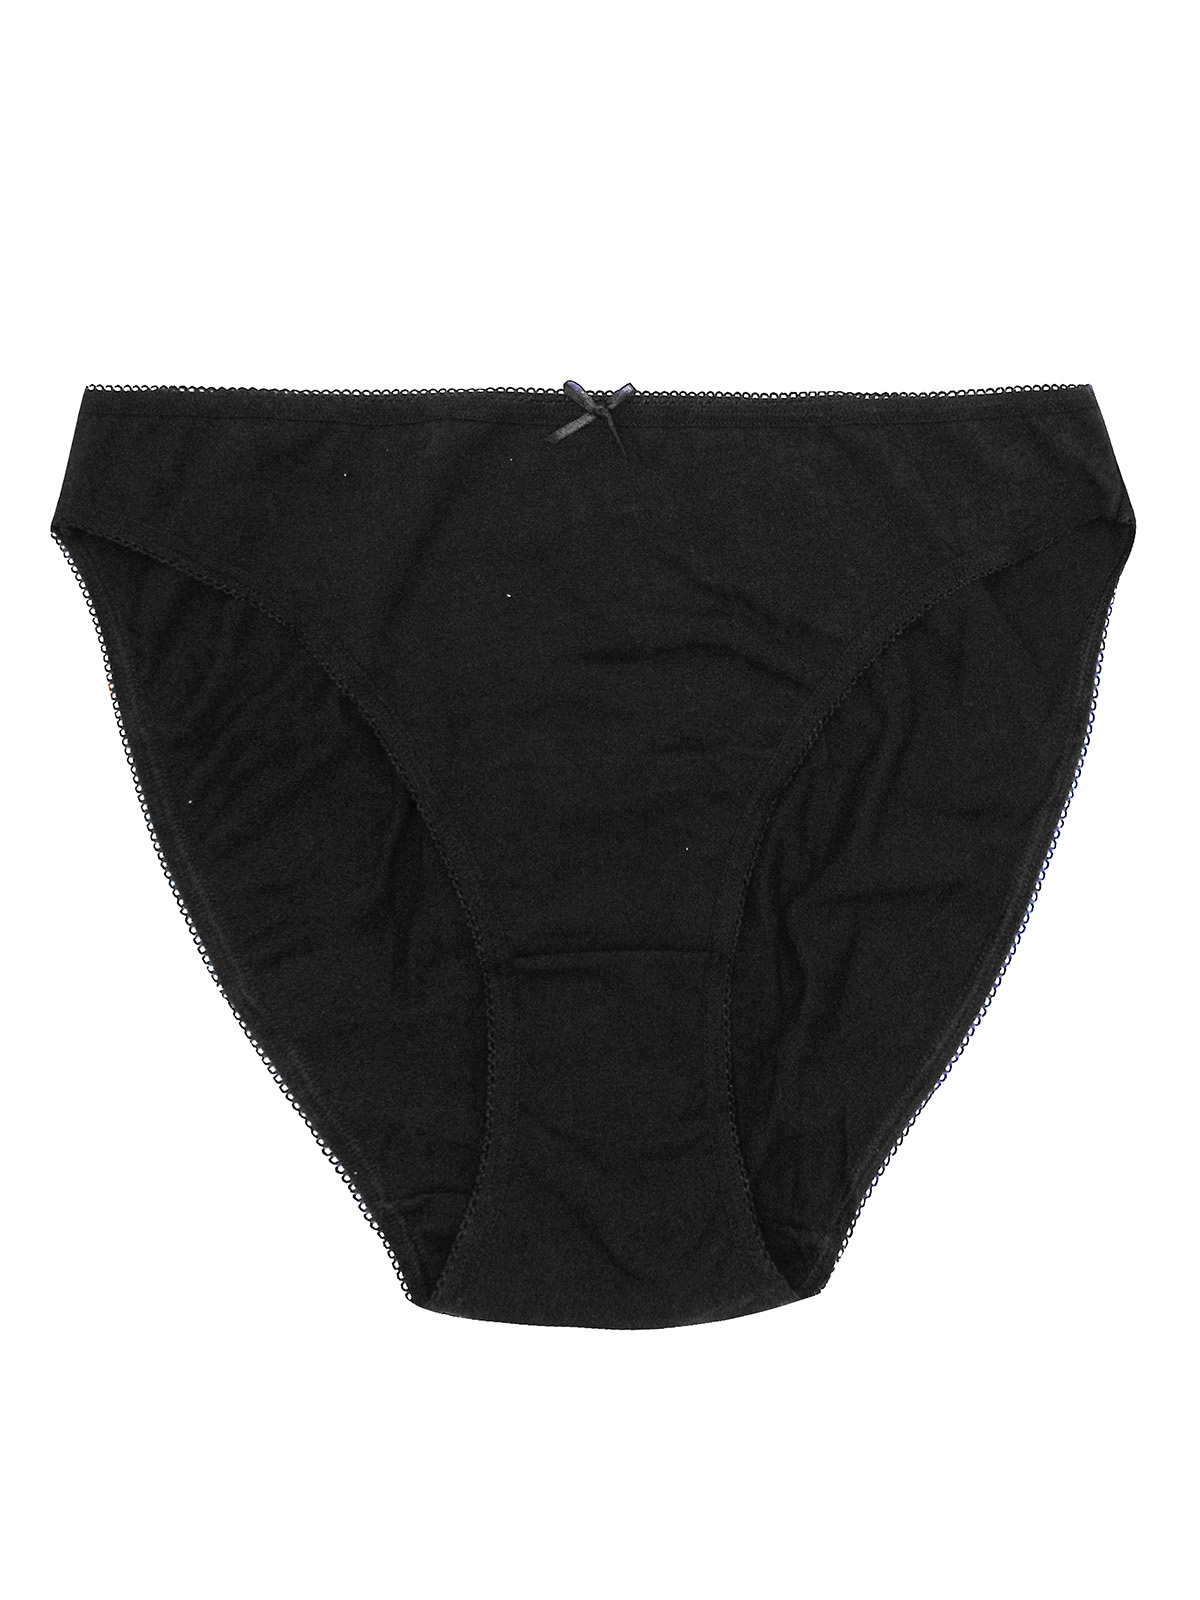 George - - G3ORGE BLACK 5-Pack Cotton Rich High Leg Knickers - Size 12 ...